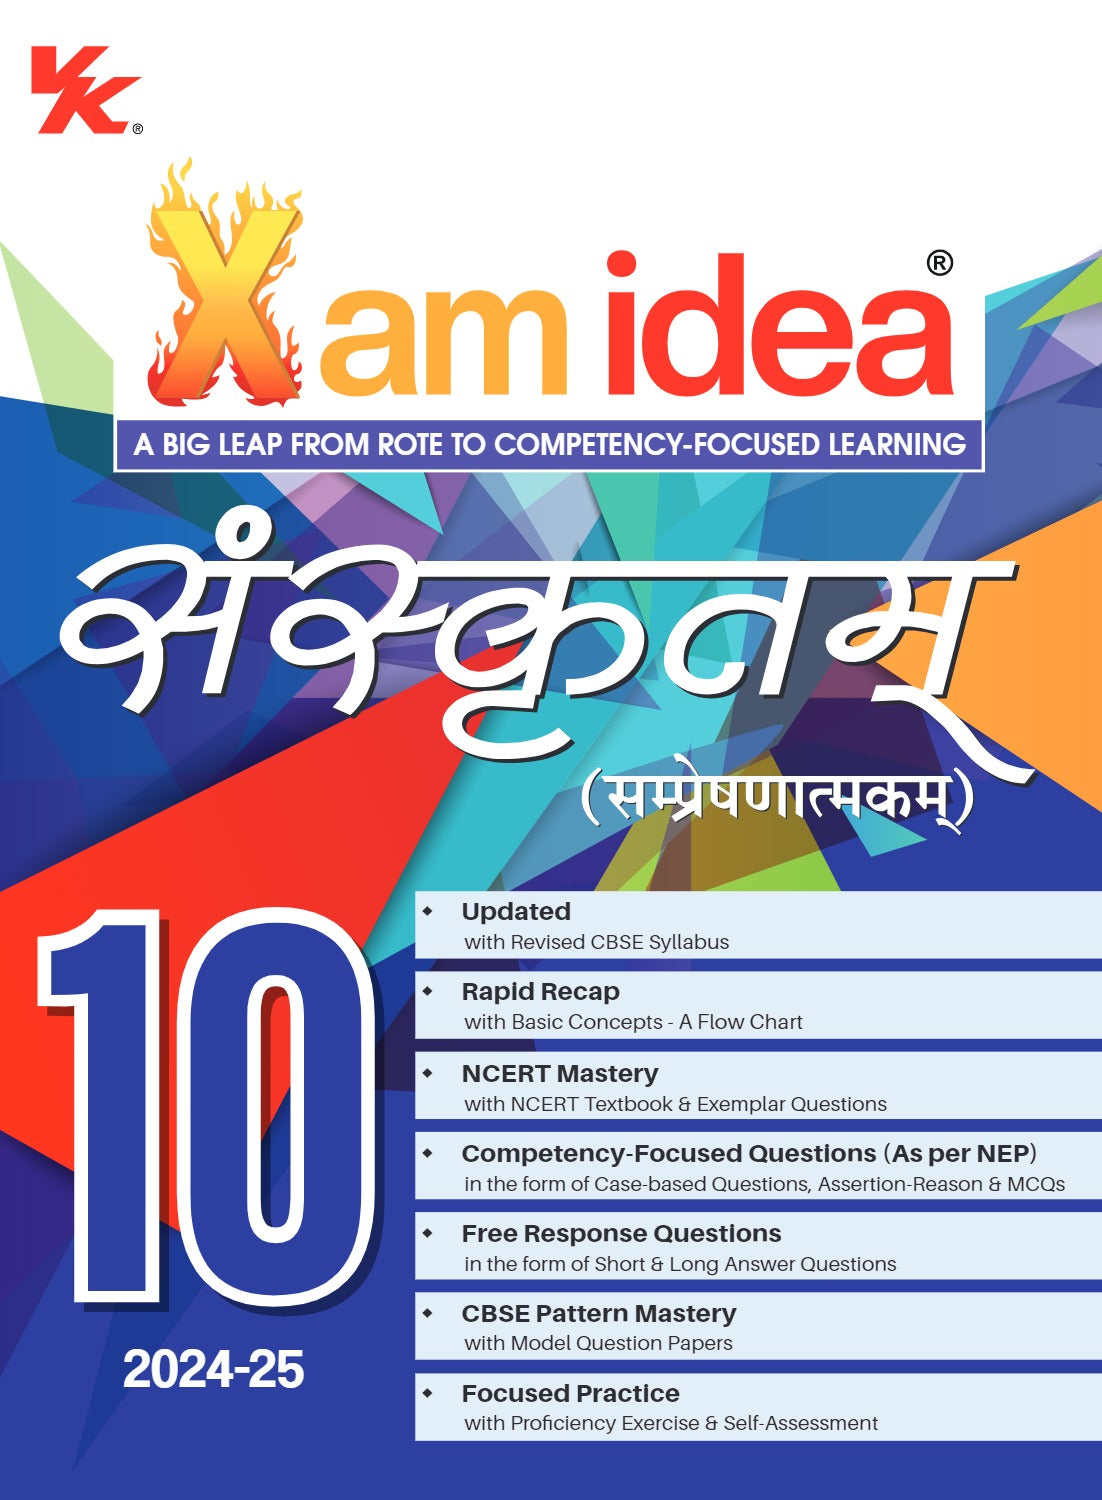 Xam idea Sanskrit (Communicative) Class 10 Book | CBSE Board | Chapterwise Question Bank | Based on Revised CBSE Syllabus | NCERT Questions Included | 2024-25 Exam